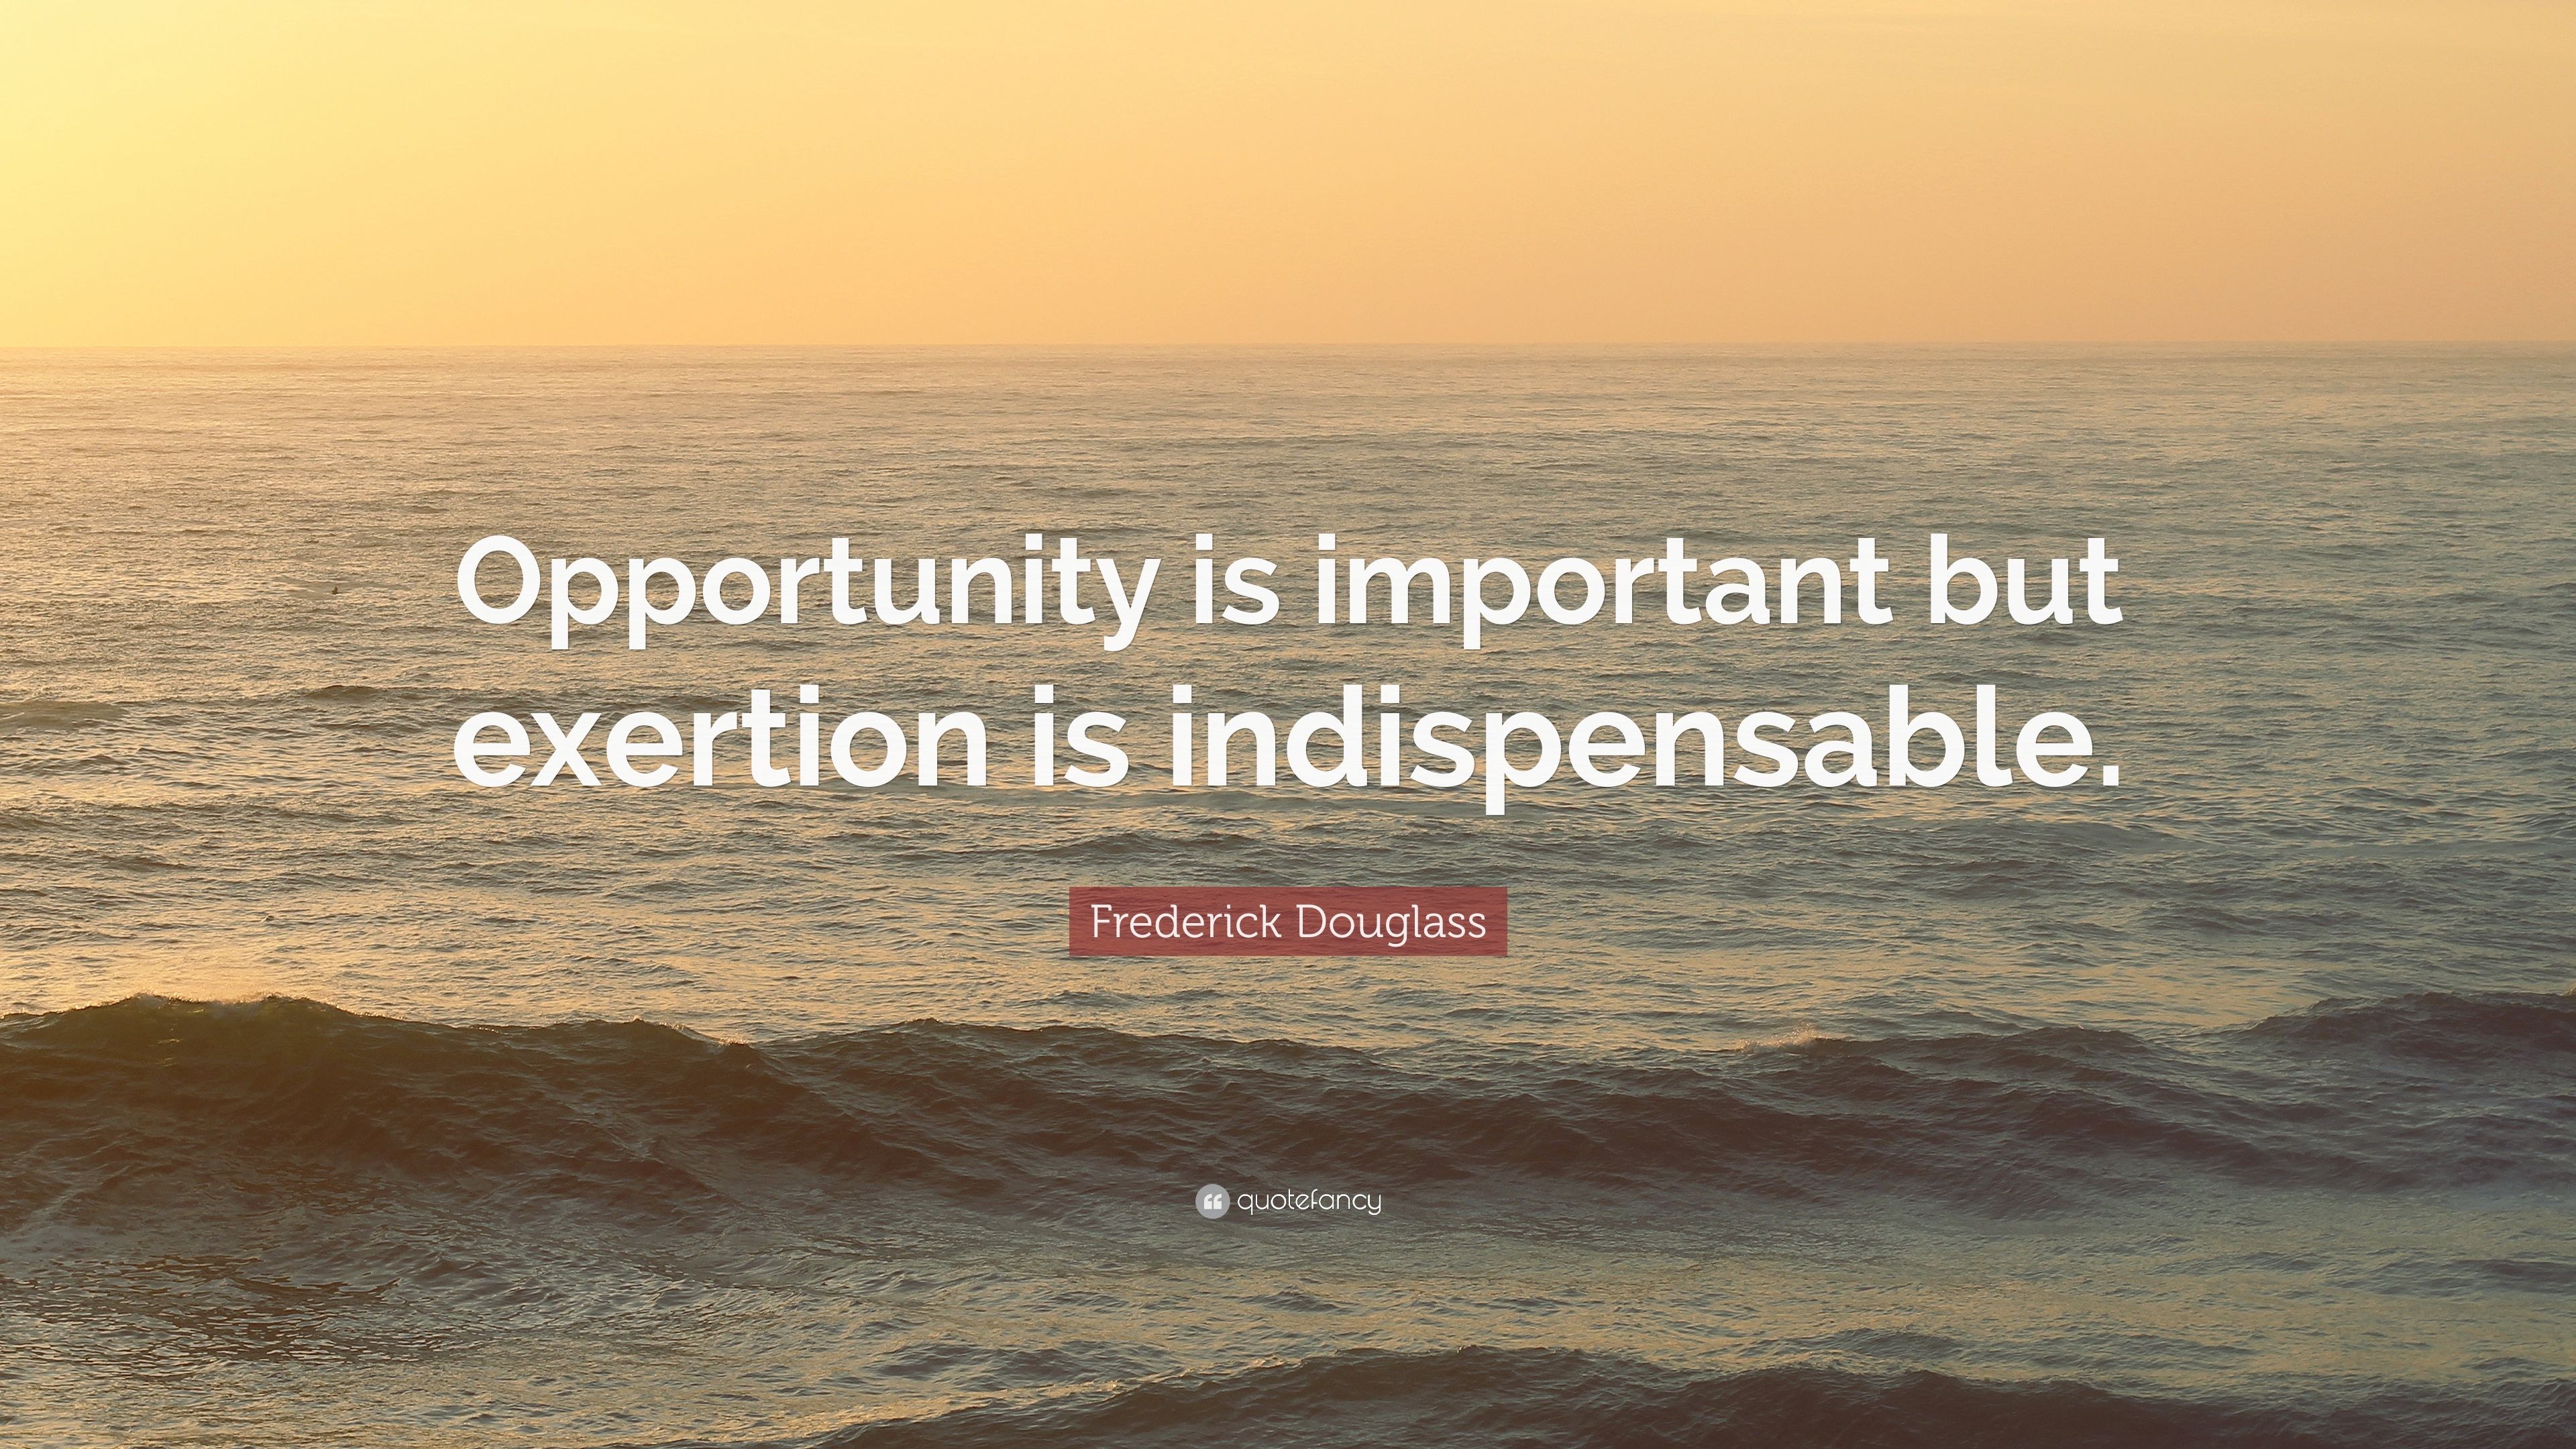 Frederick Douglass Quote: “Opportunity is important but exertion